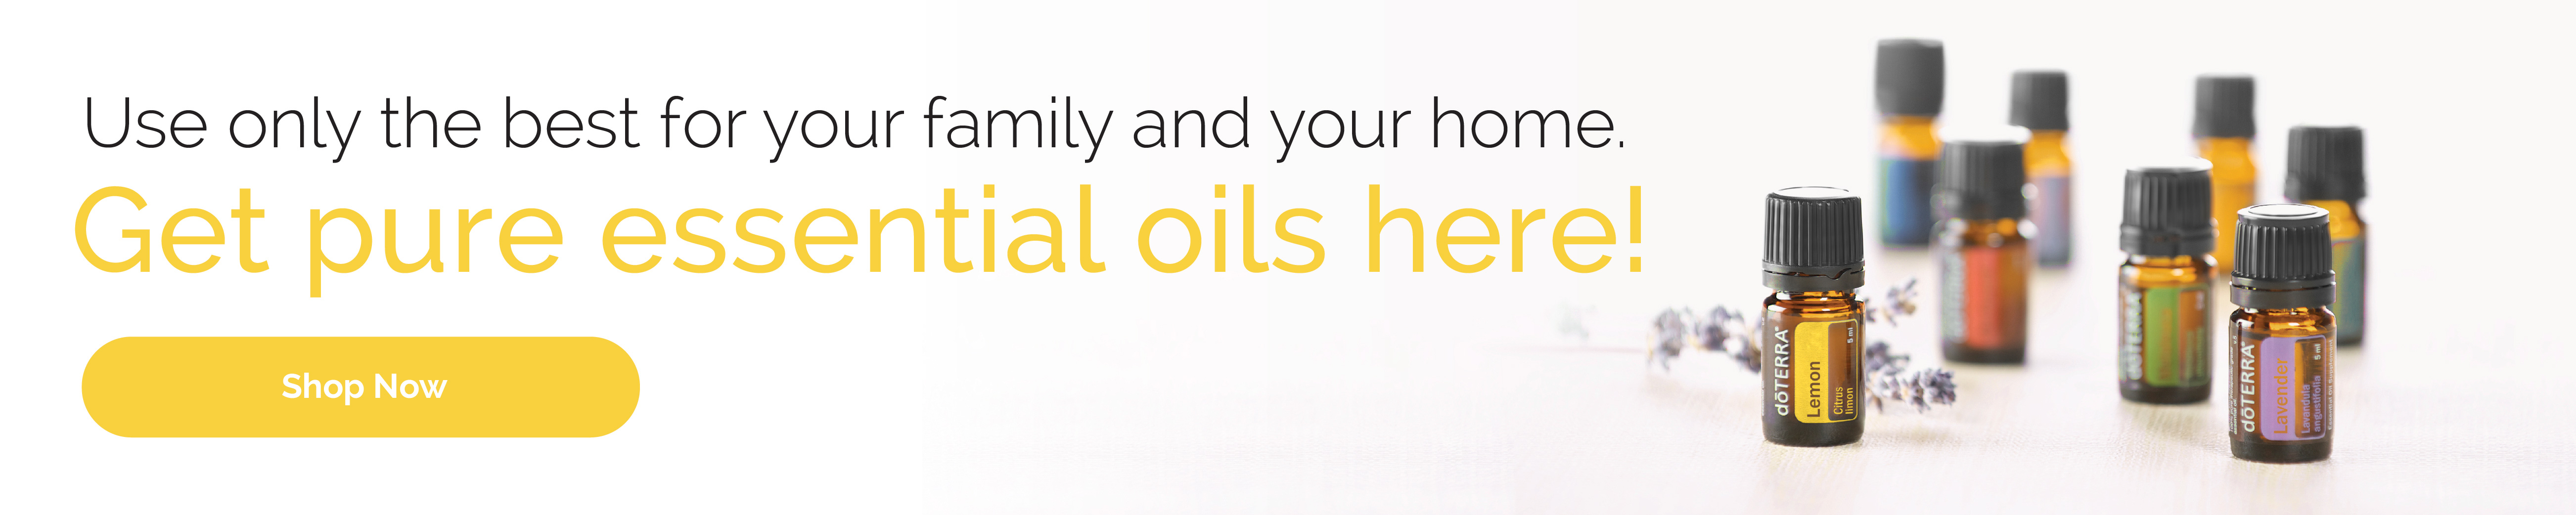 Use only the best for your family and your home我. Get pure essential oils here!